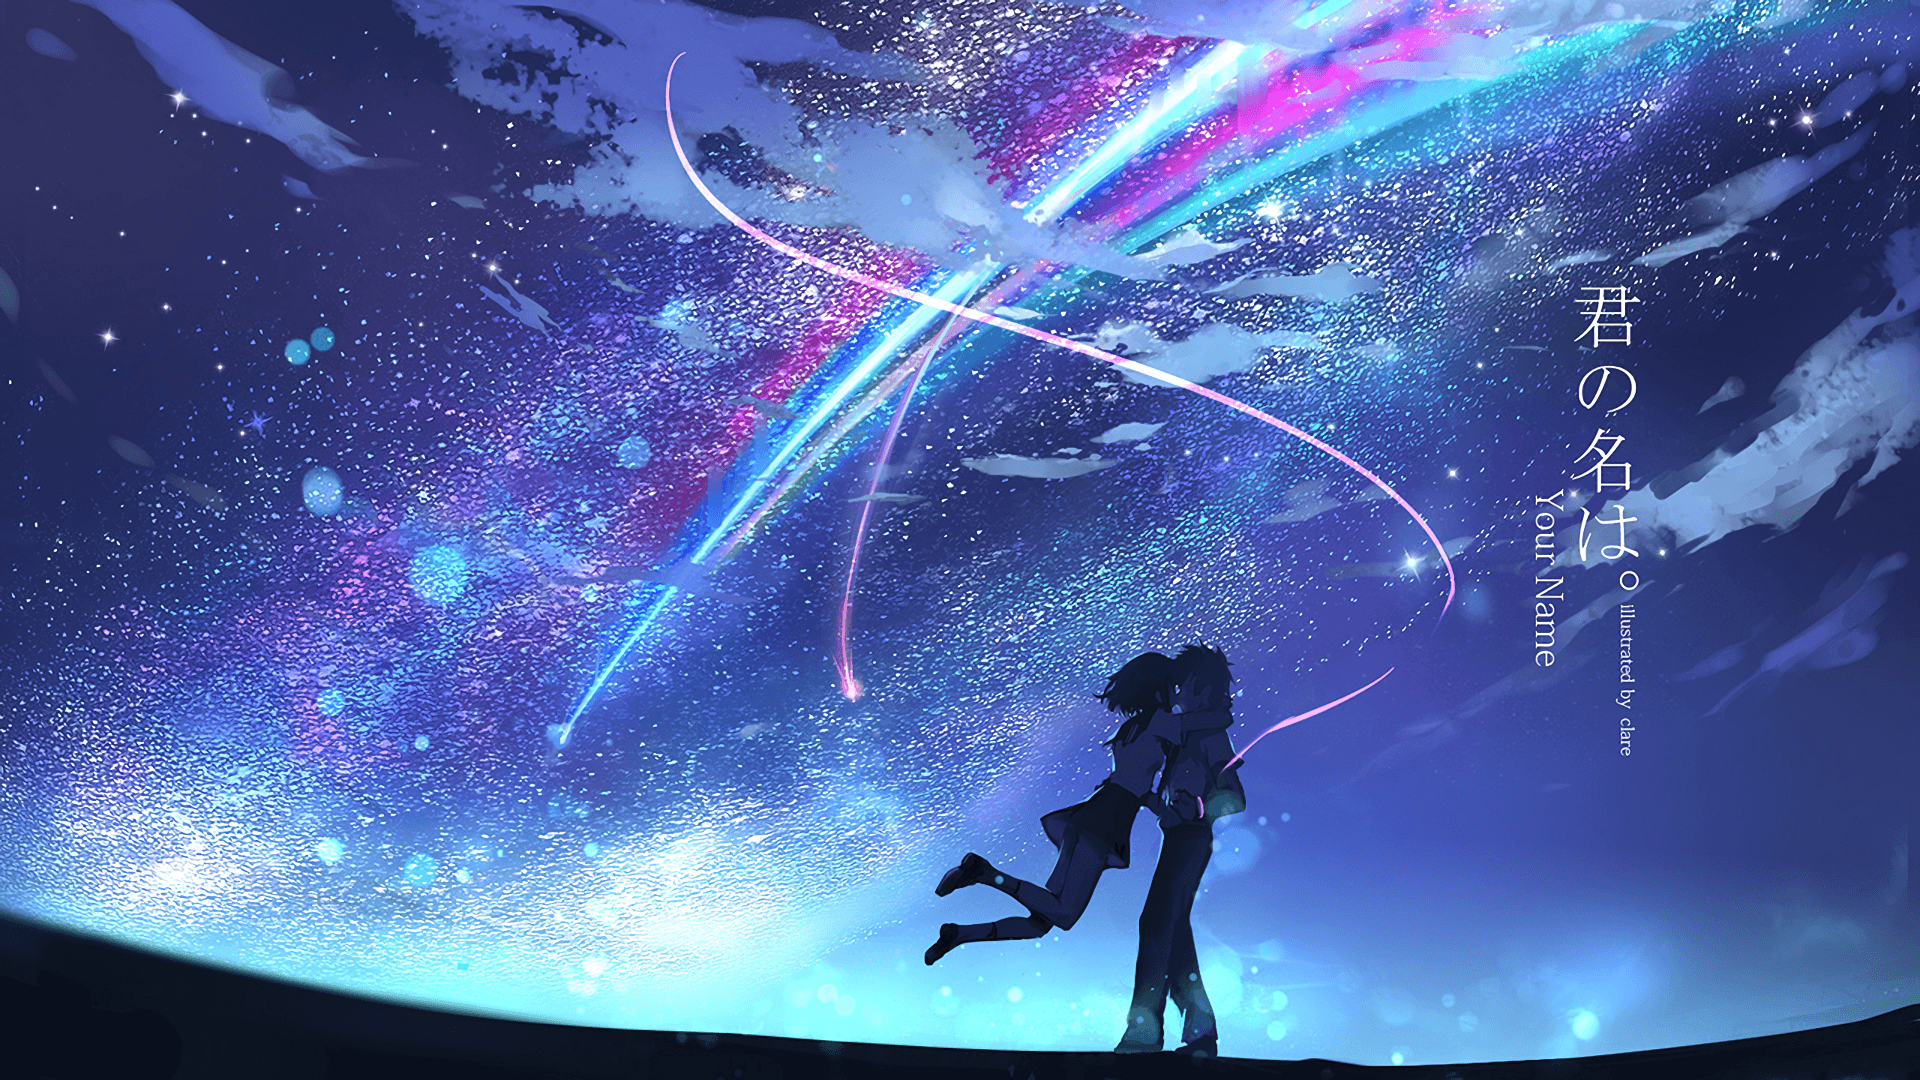 Your Name Wallpaper Hd 4k Free 4k hd high quality anime desktop, mobile, tablet, iphone, android, macbook wallpapers with many more resolutions available. your name wallpaper hd 4k